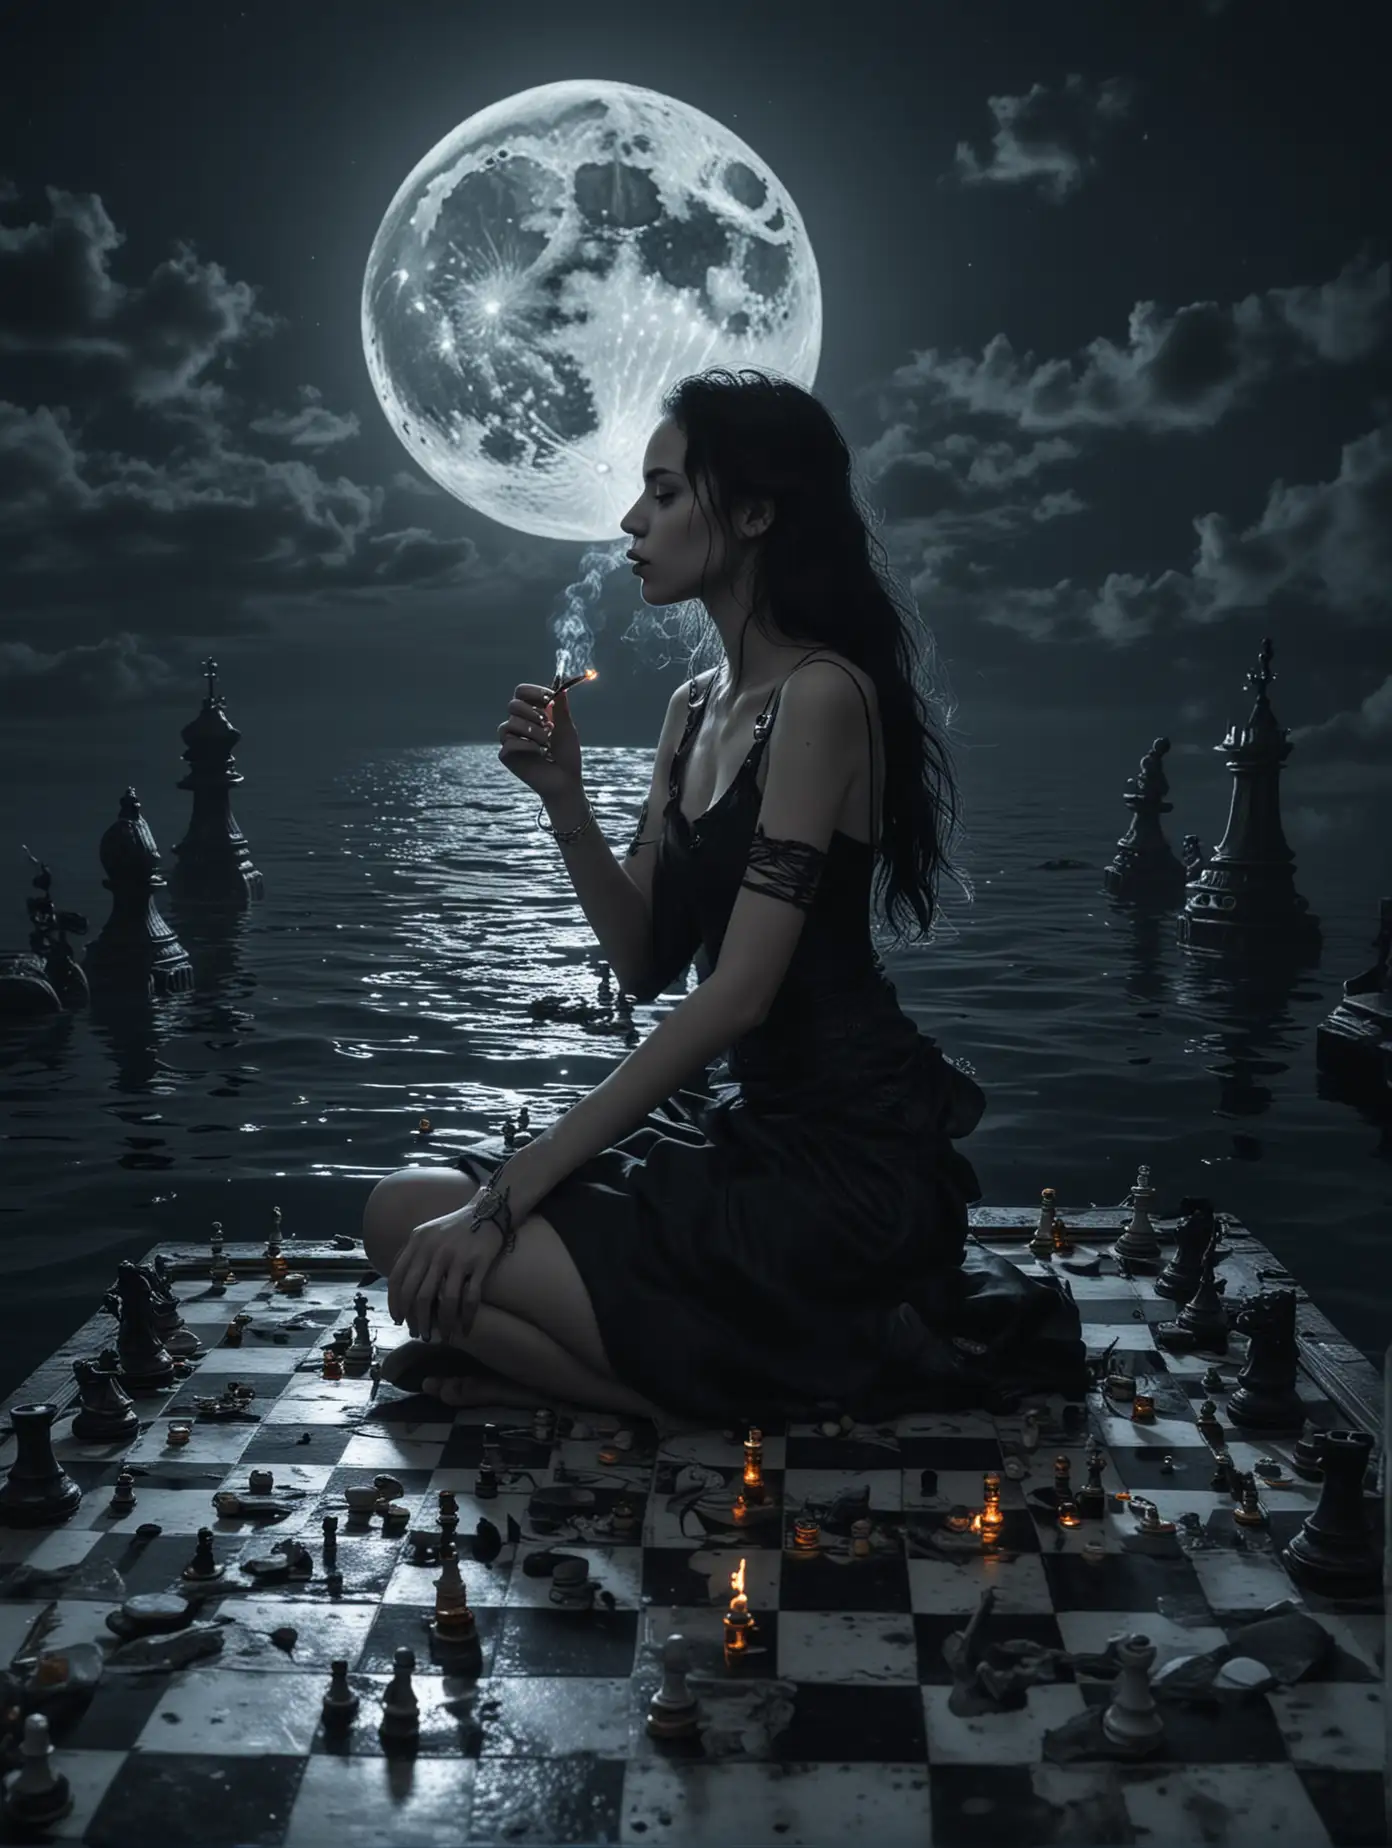 Lonely Girl Smoking on Chessboard in Deep Ocean with Moonlight and Gothic Atmosphere